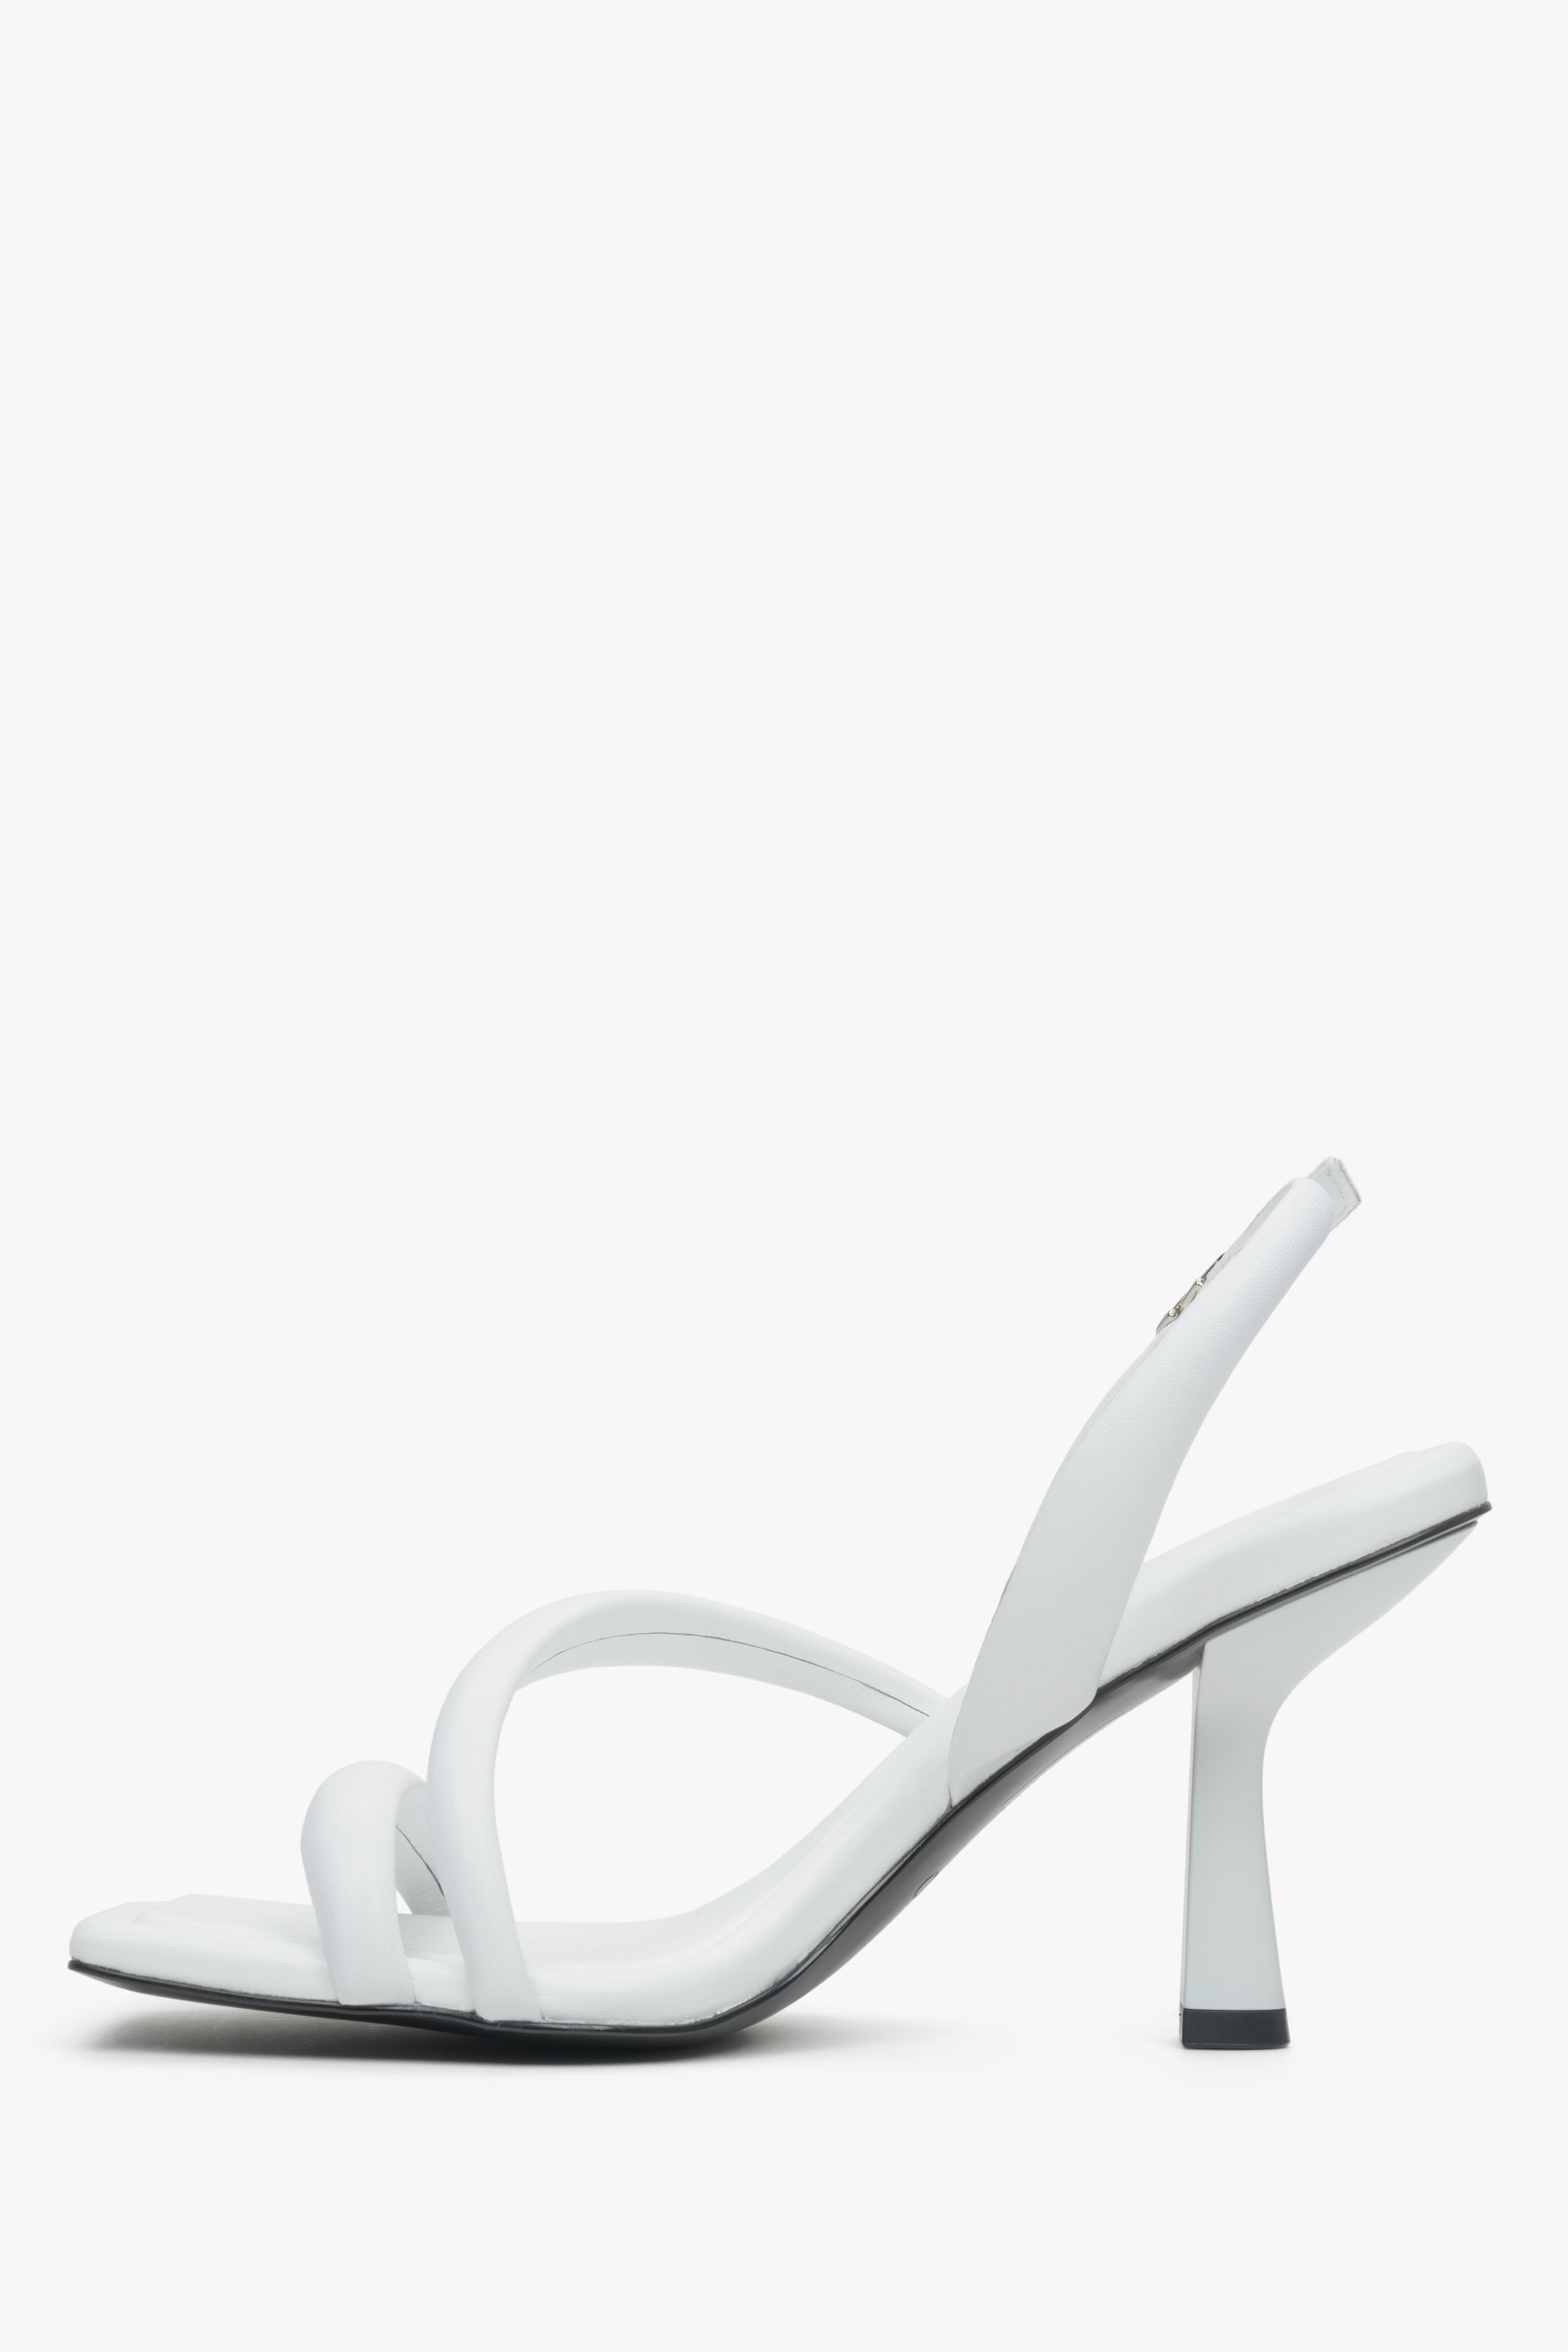 Soft-strap heeled sandals in white colour - shoe profile.